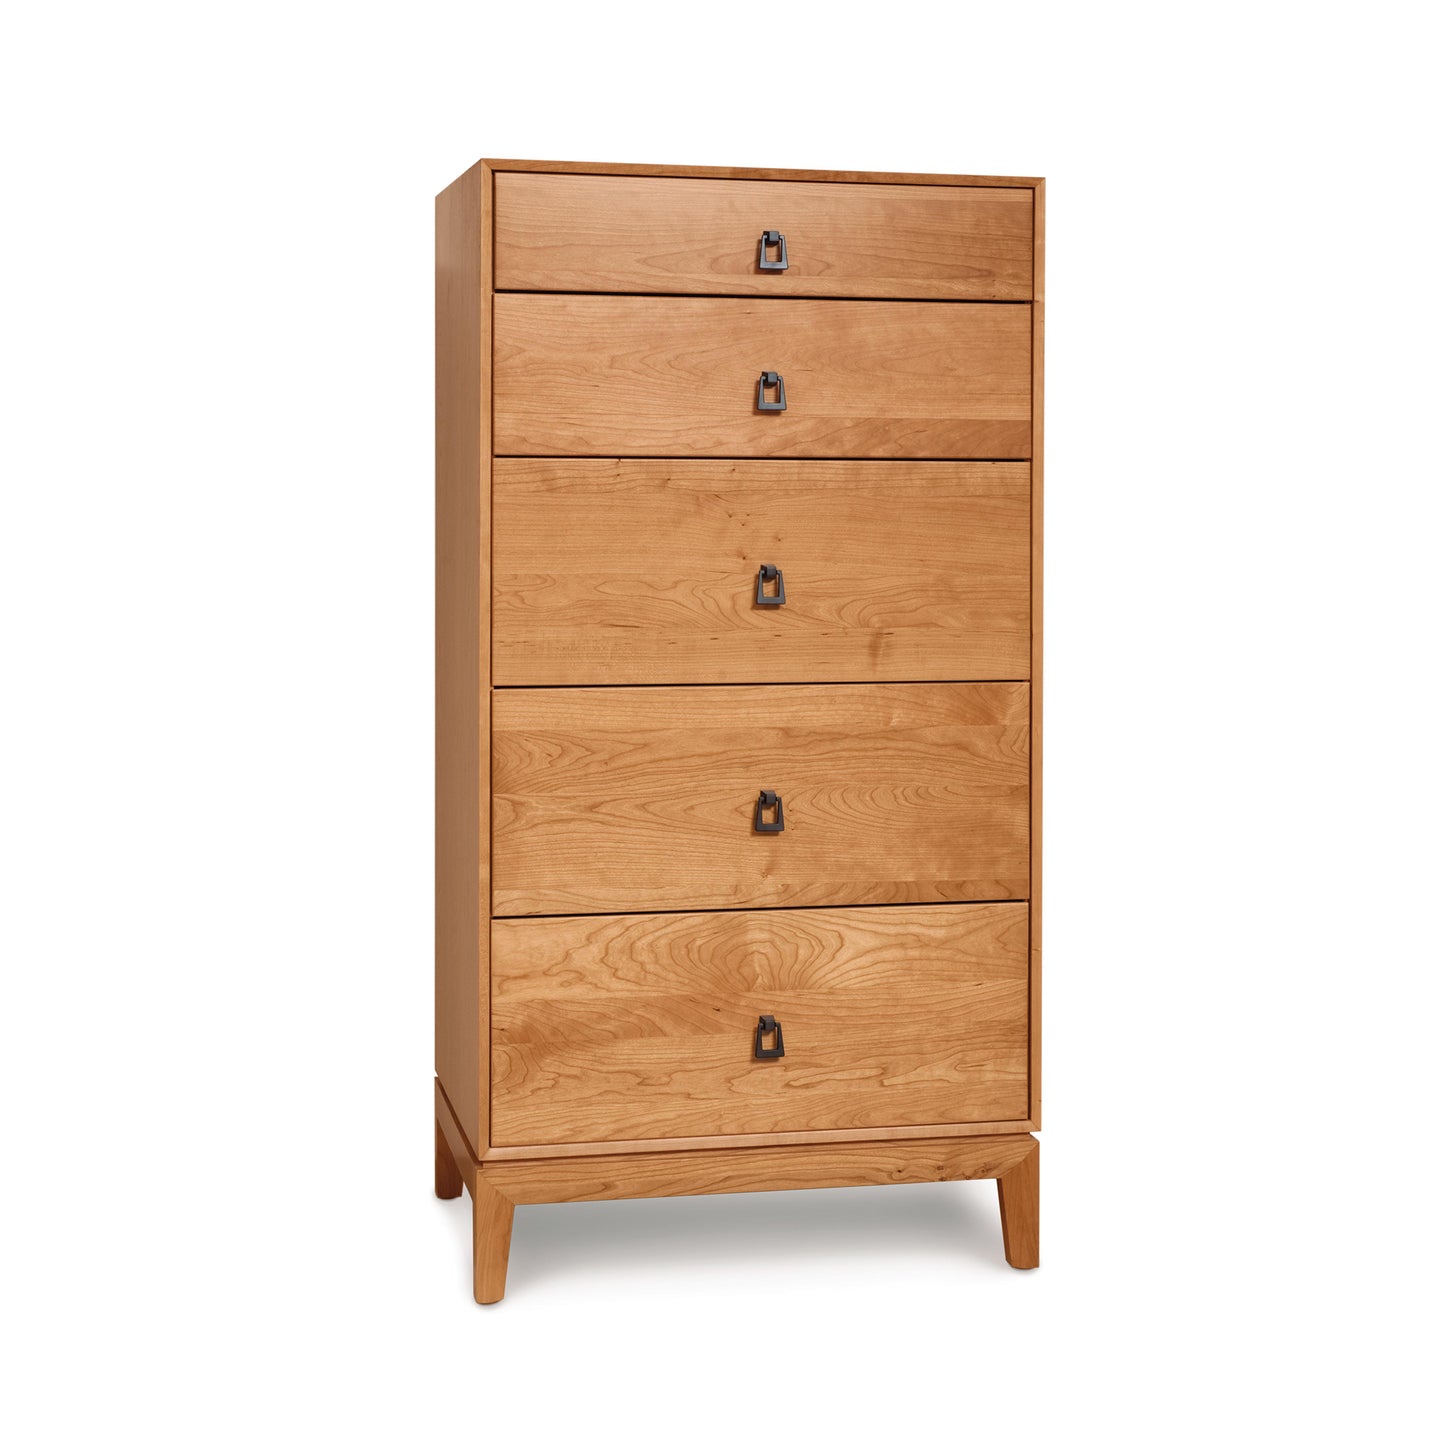 A Mansfield 5-Drawer Narrow Chest, handmade in Vermont by Copeland Furniture, showcasing an Arts and Crafts style with solid natural wood.